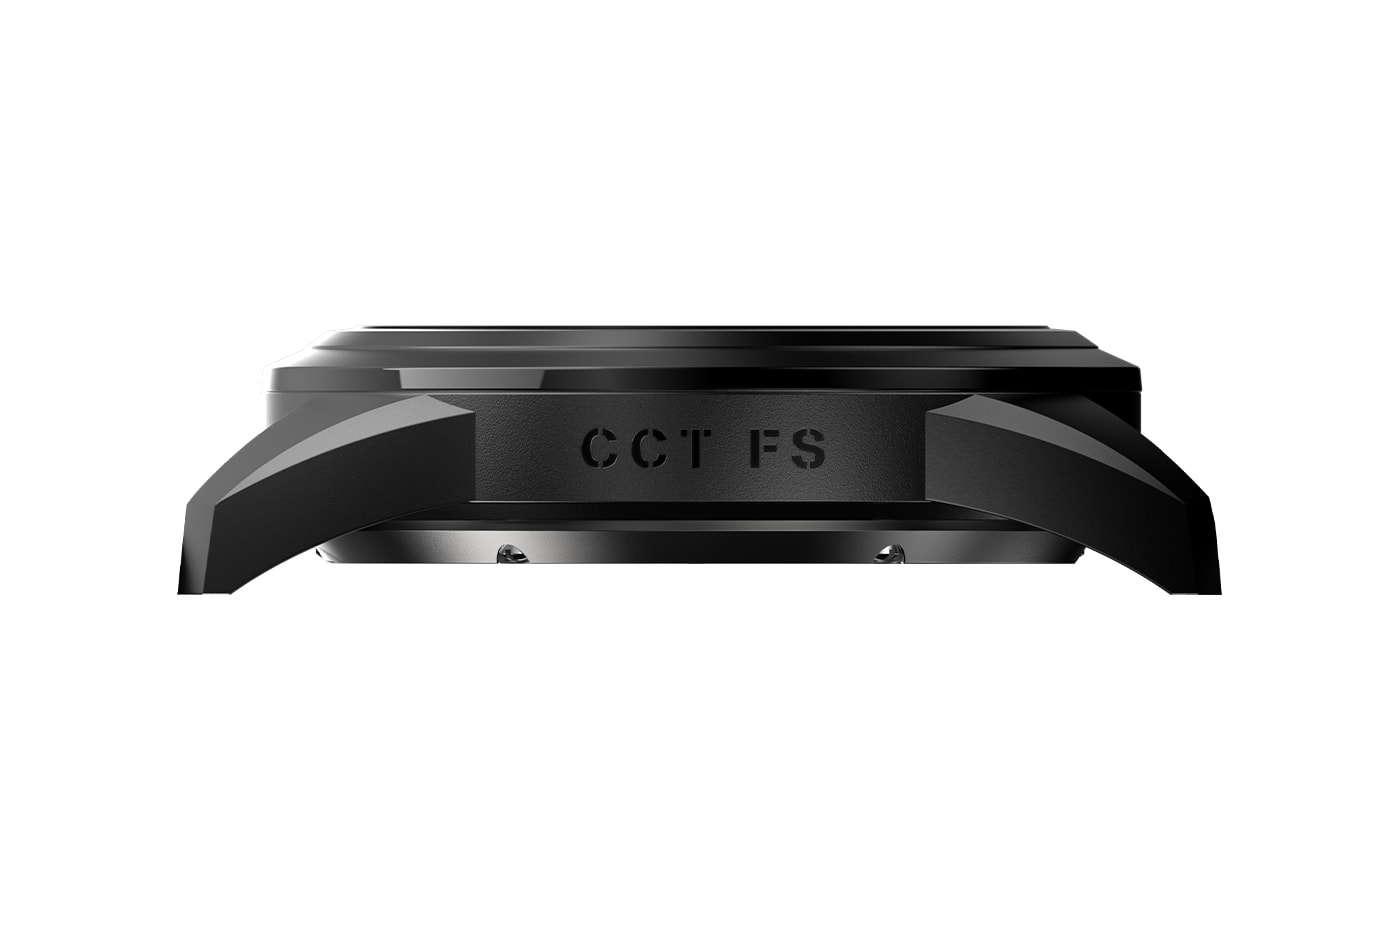 AWAKE CCT FS for French Special Forces Limited Edition Watch Release Info